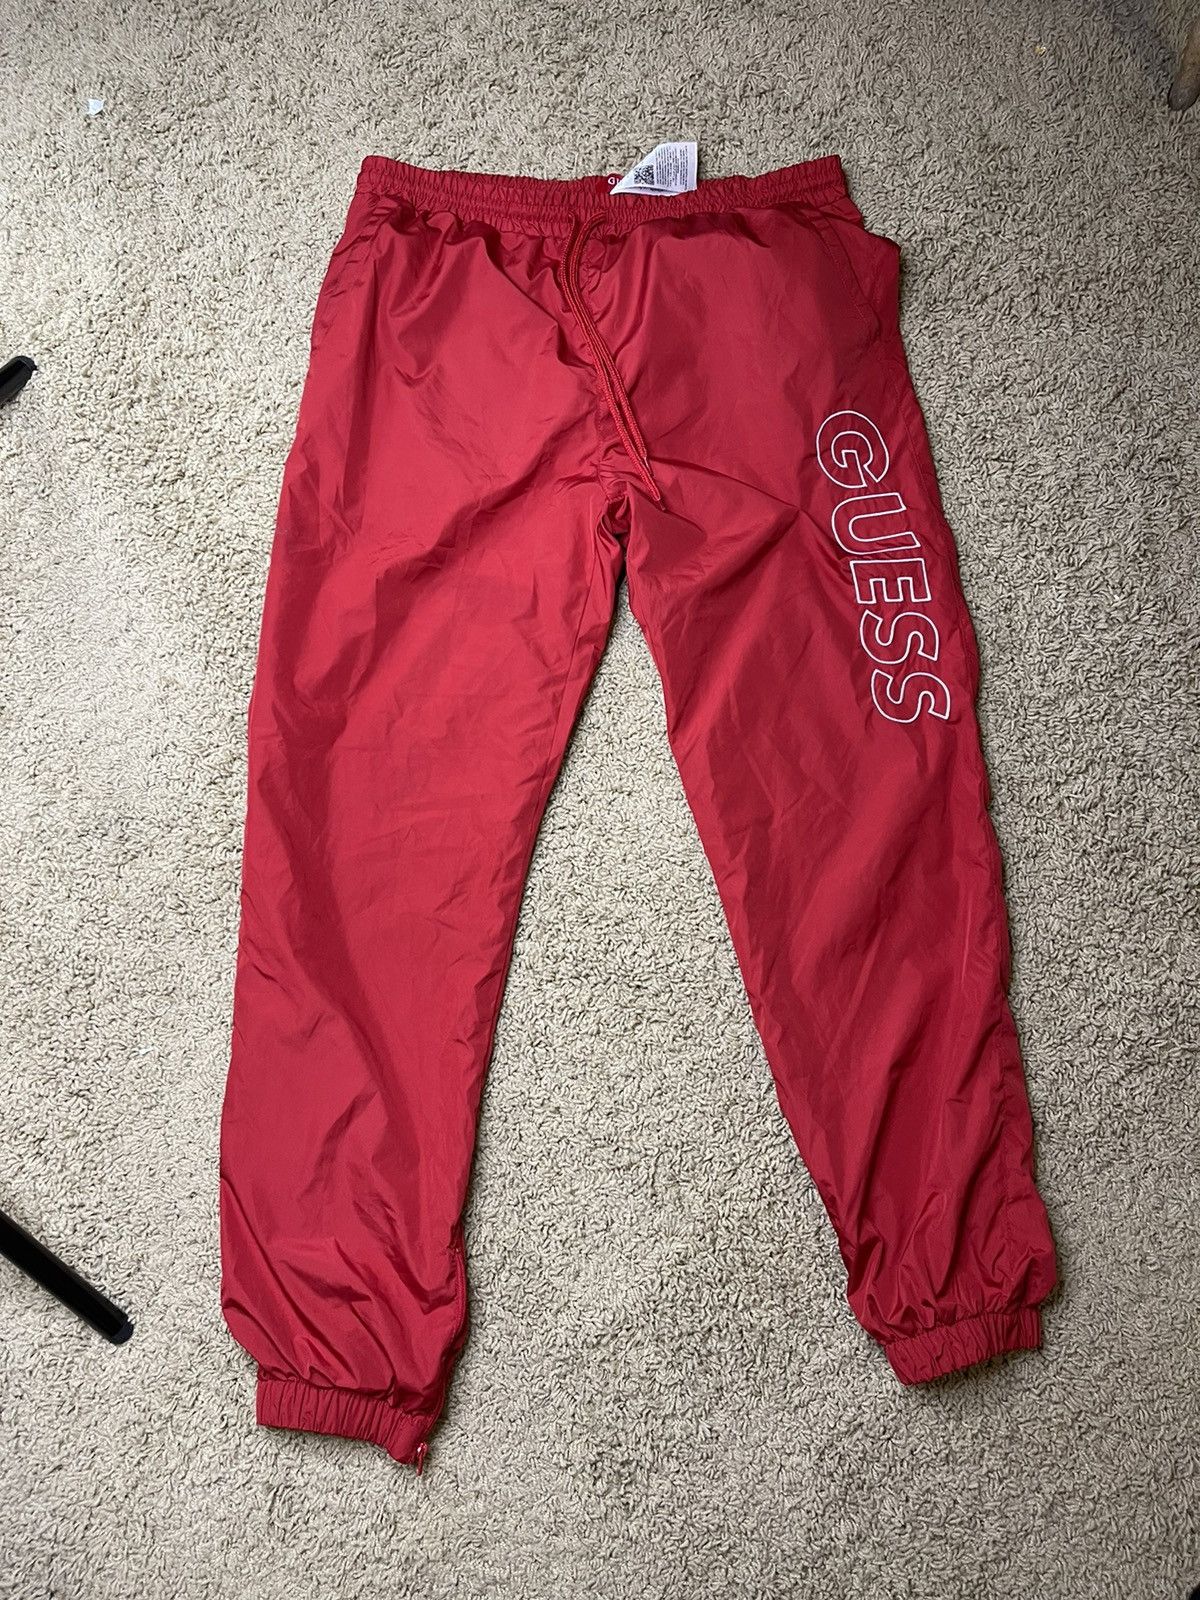 Guess Red GUESS tracksuit pant Size US 32 / EU 48 - 1 Preview